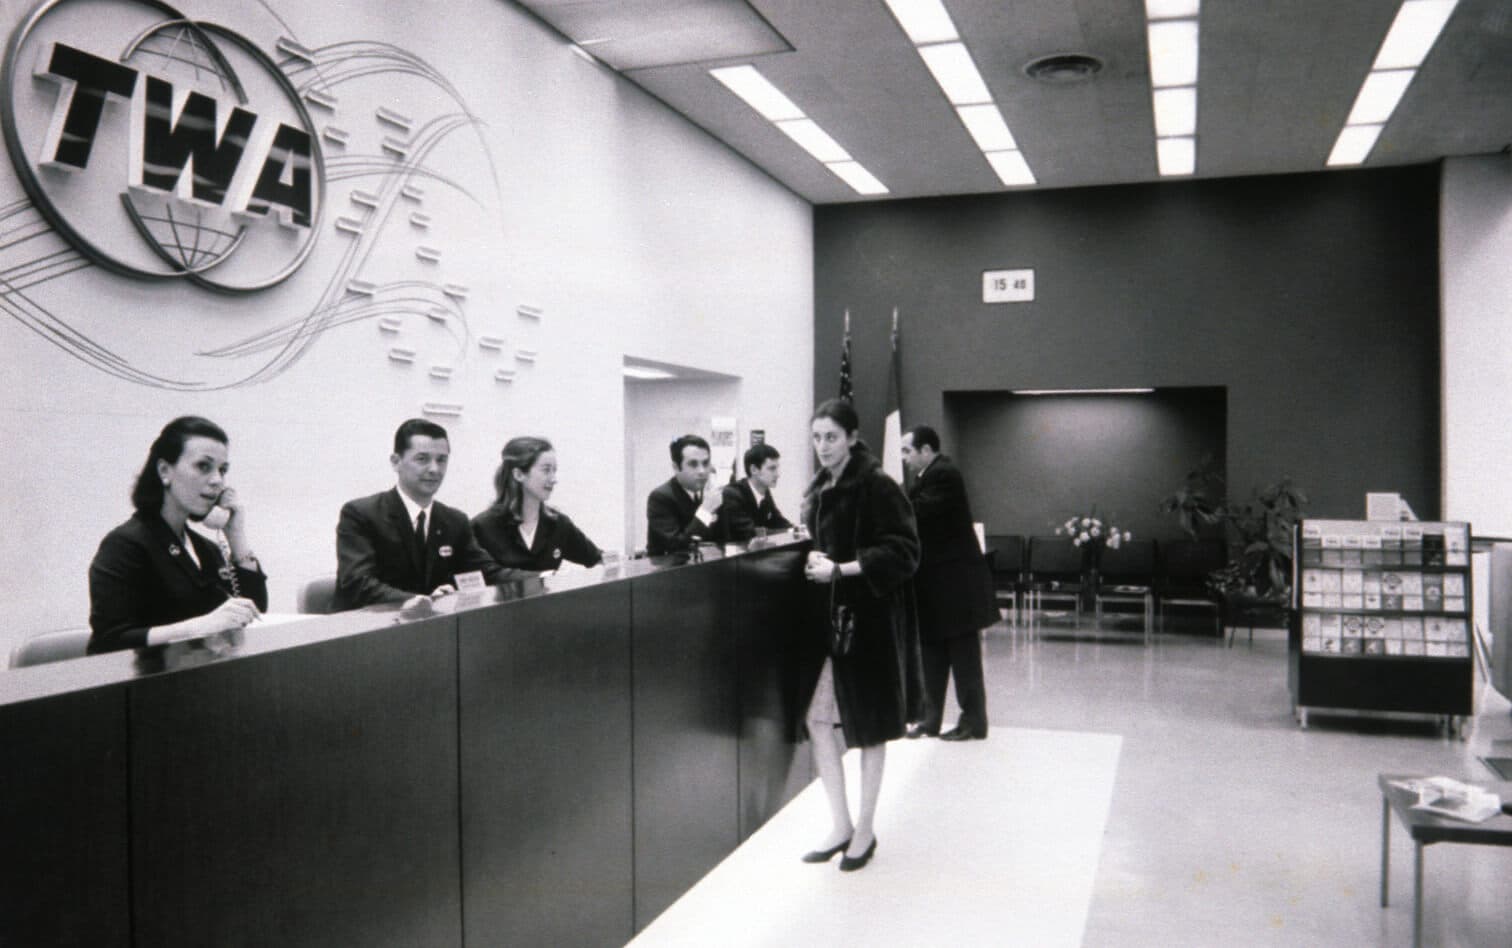 Passengers checking in for a flight at the TWA counter